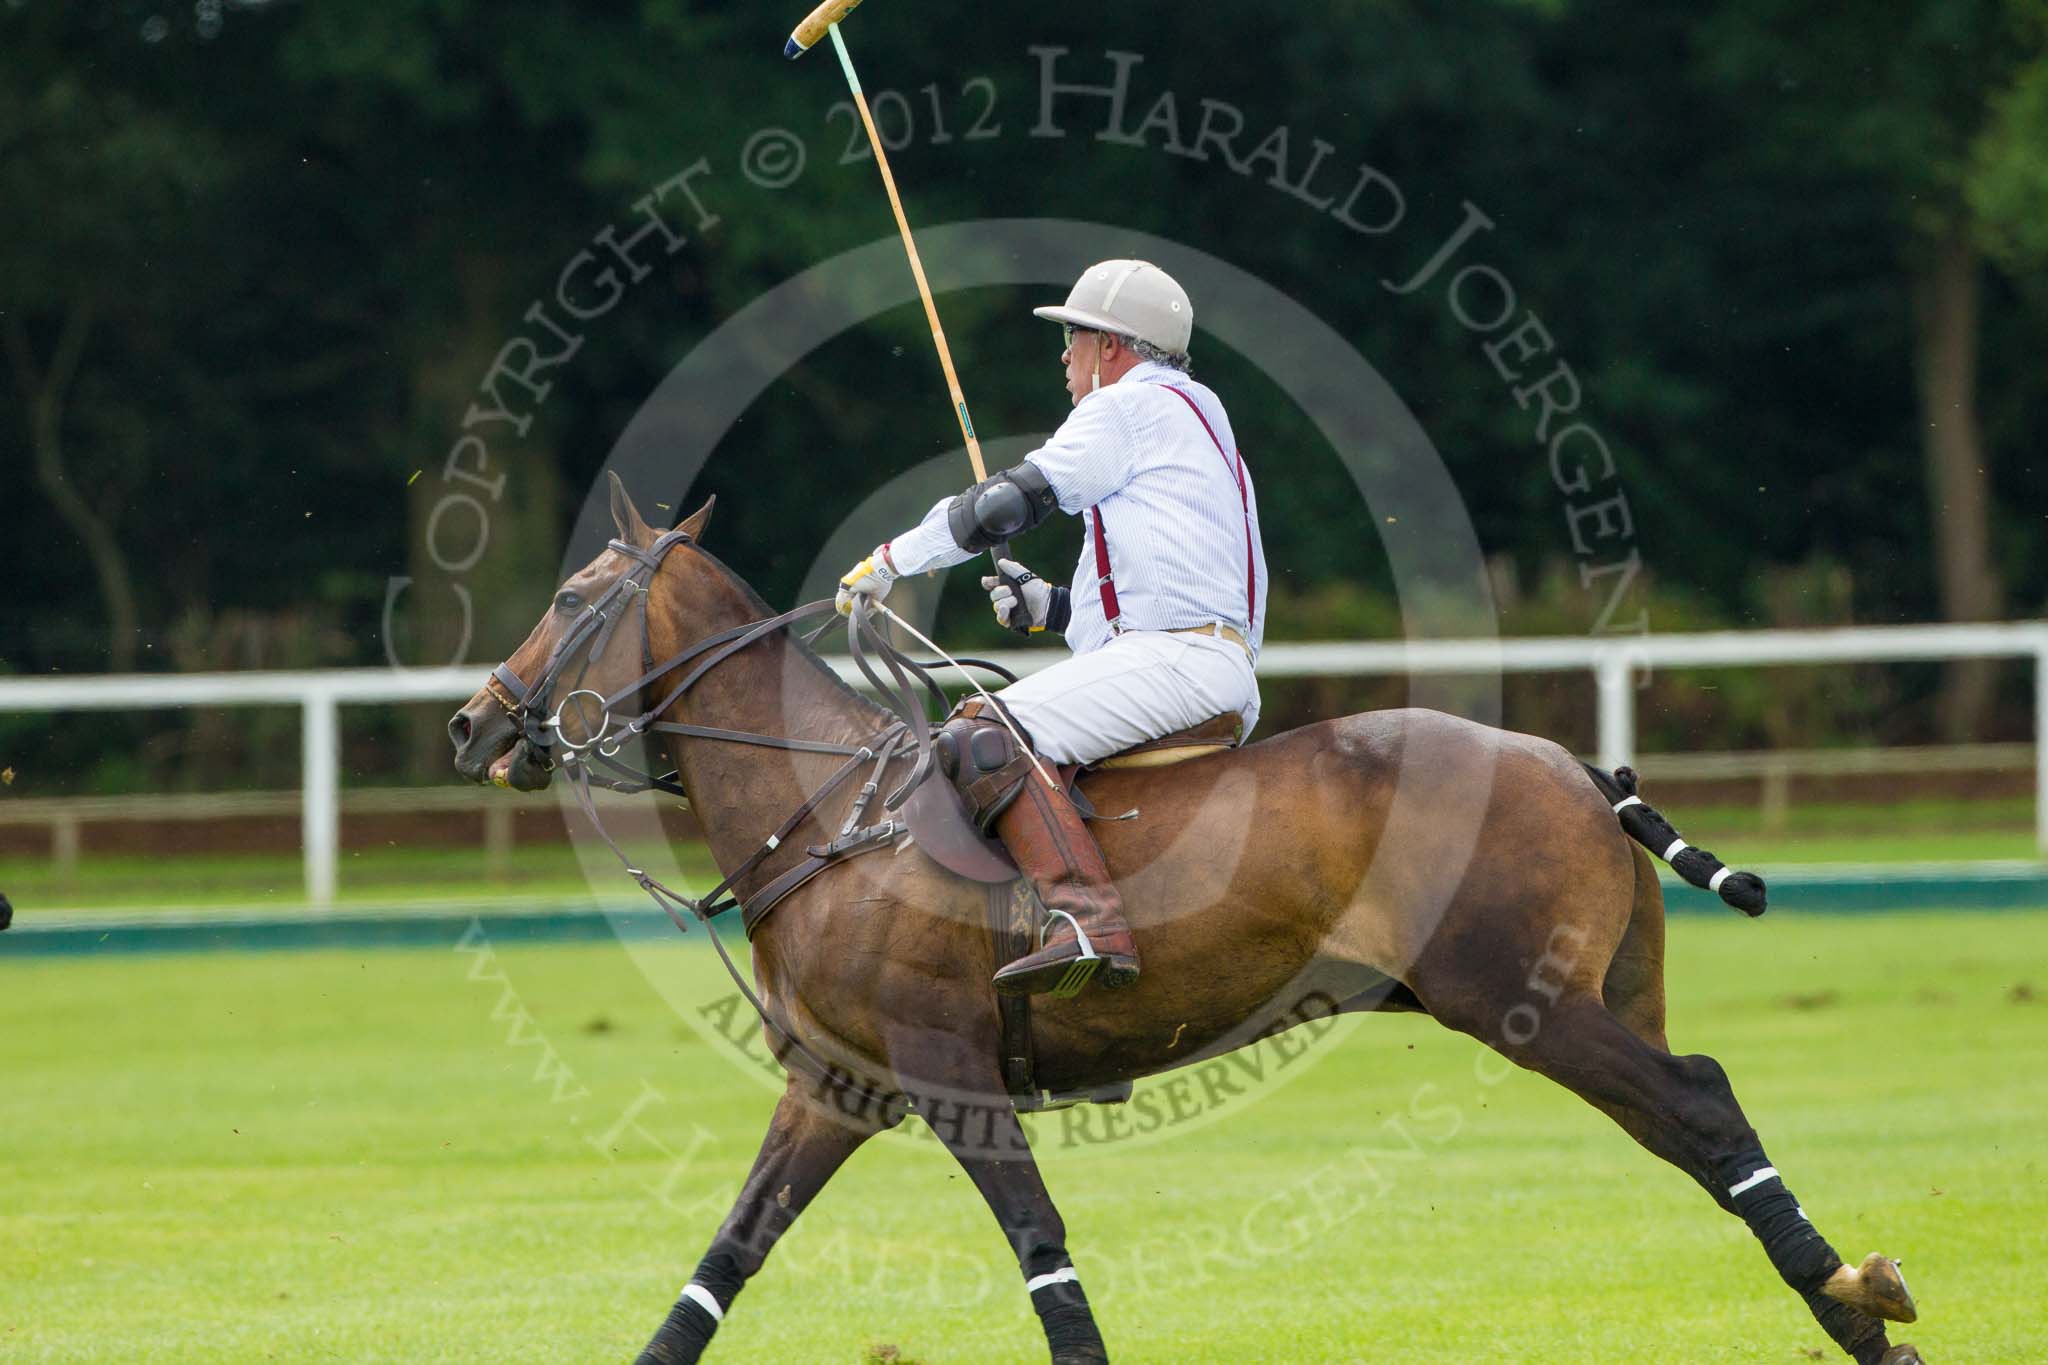 7th Heritage Polo Cup finals: La Mariposa Argentina, Mariano Darritchon..
Hurtwood Park Polo Club,
Ewhurst Green,
Surrey,
United Kingdom,
on 05 August 2012 at 13:37, image #36